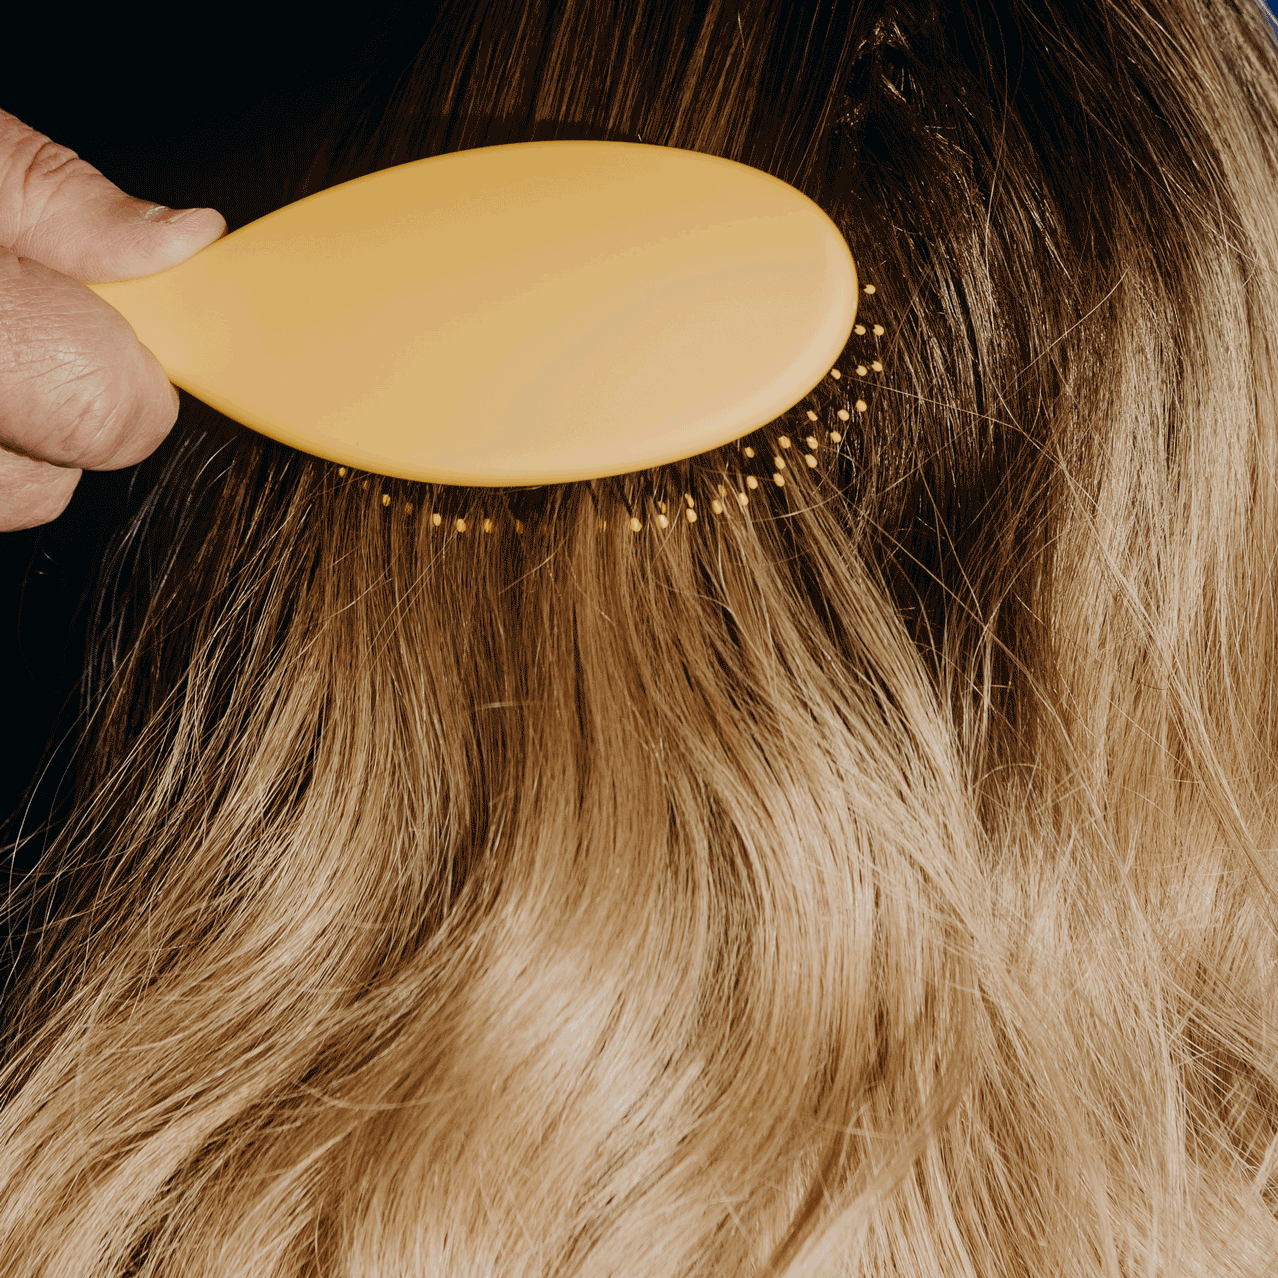 Scientists at Harvard teach you to brush your hair: the most painless way  to comb tangled hair - iNEWS